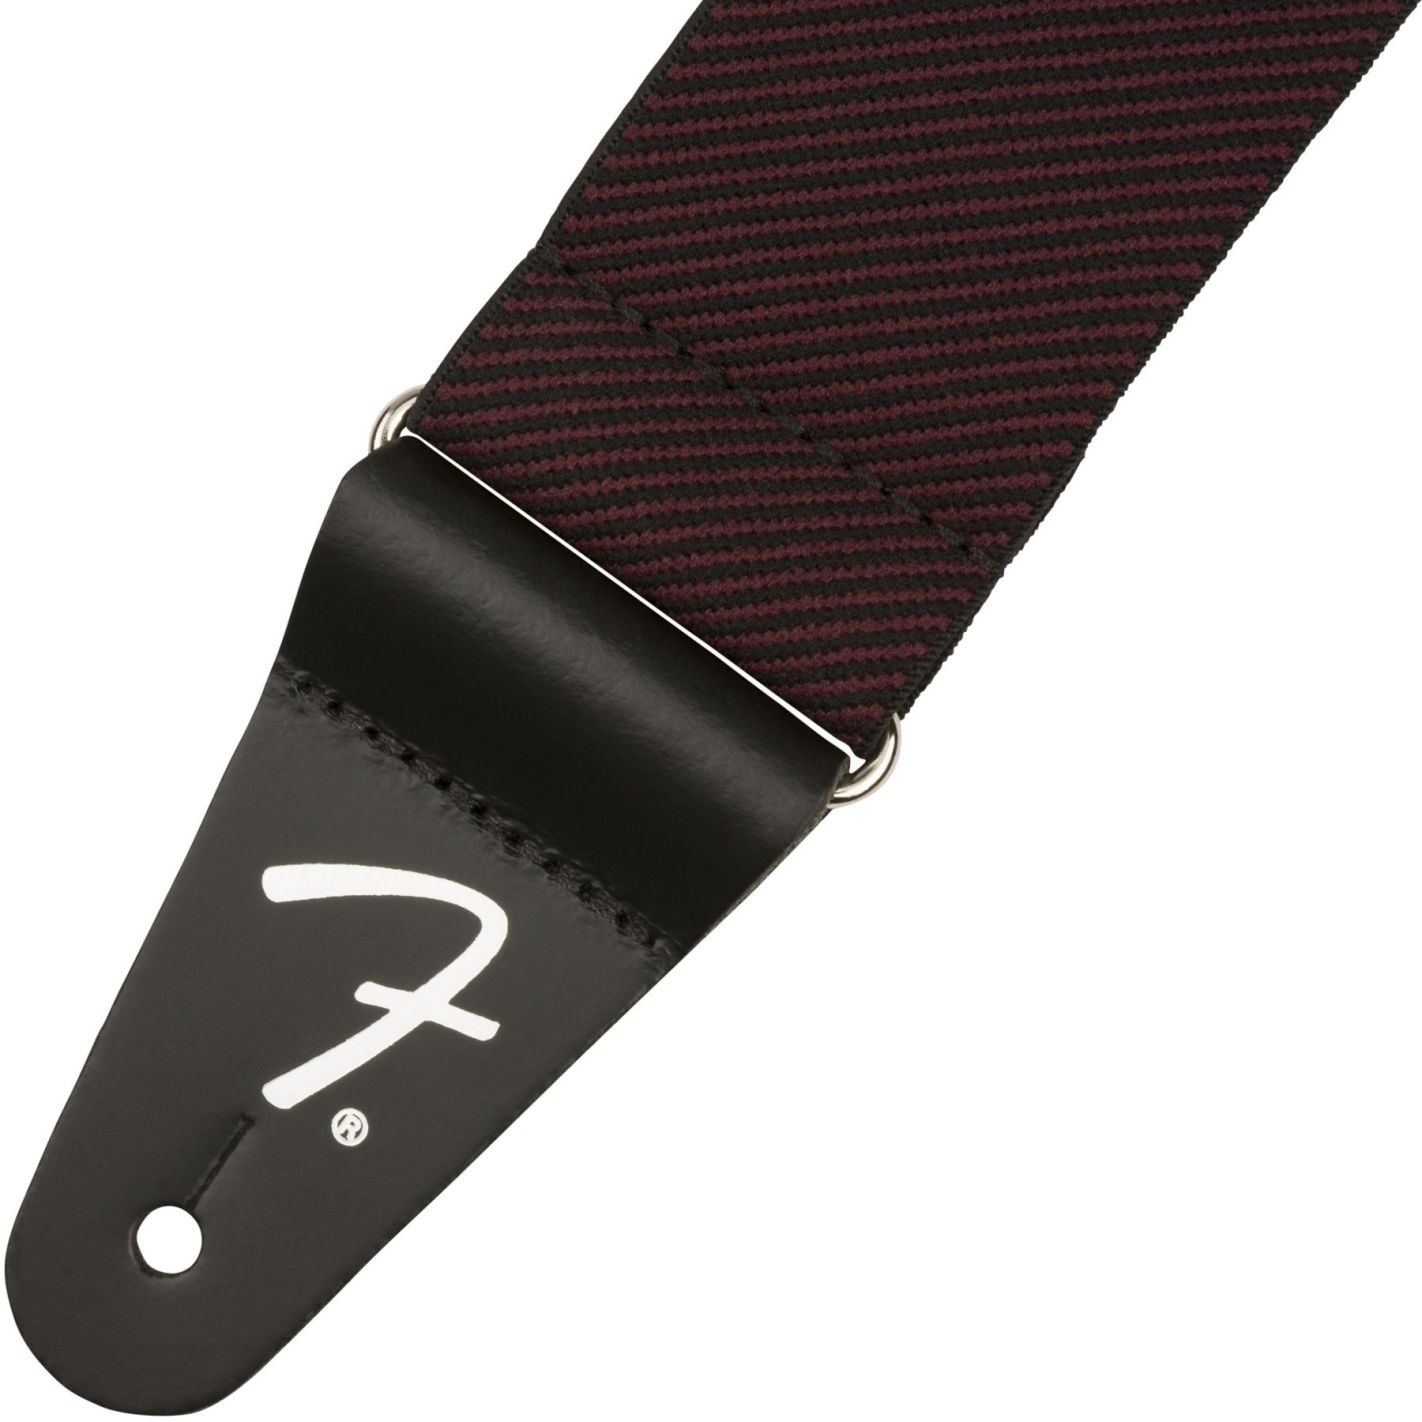 WEIGHLESS TWEED STRAP OXBLOOD